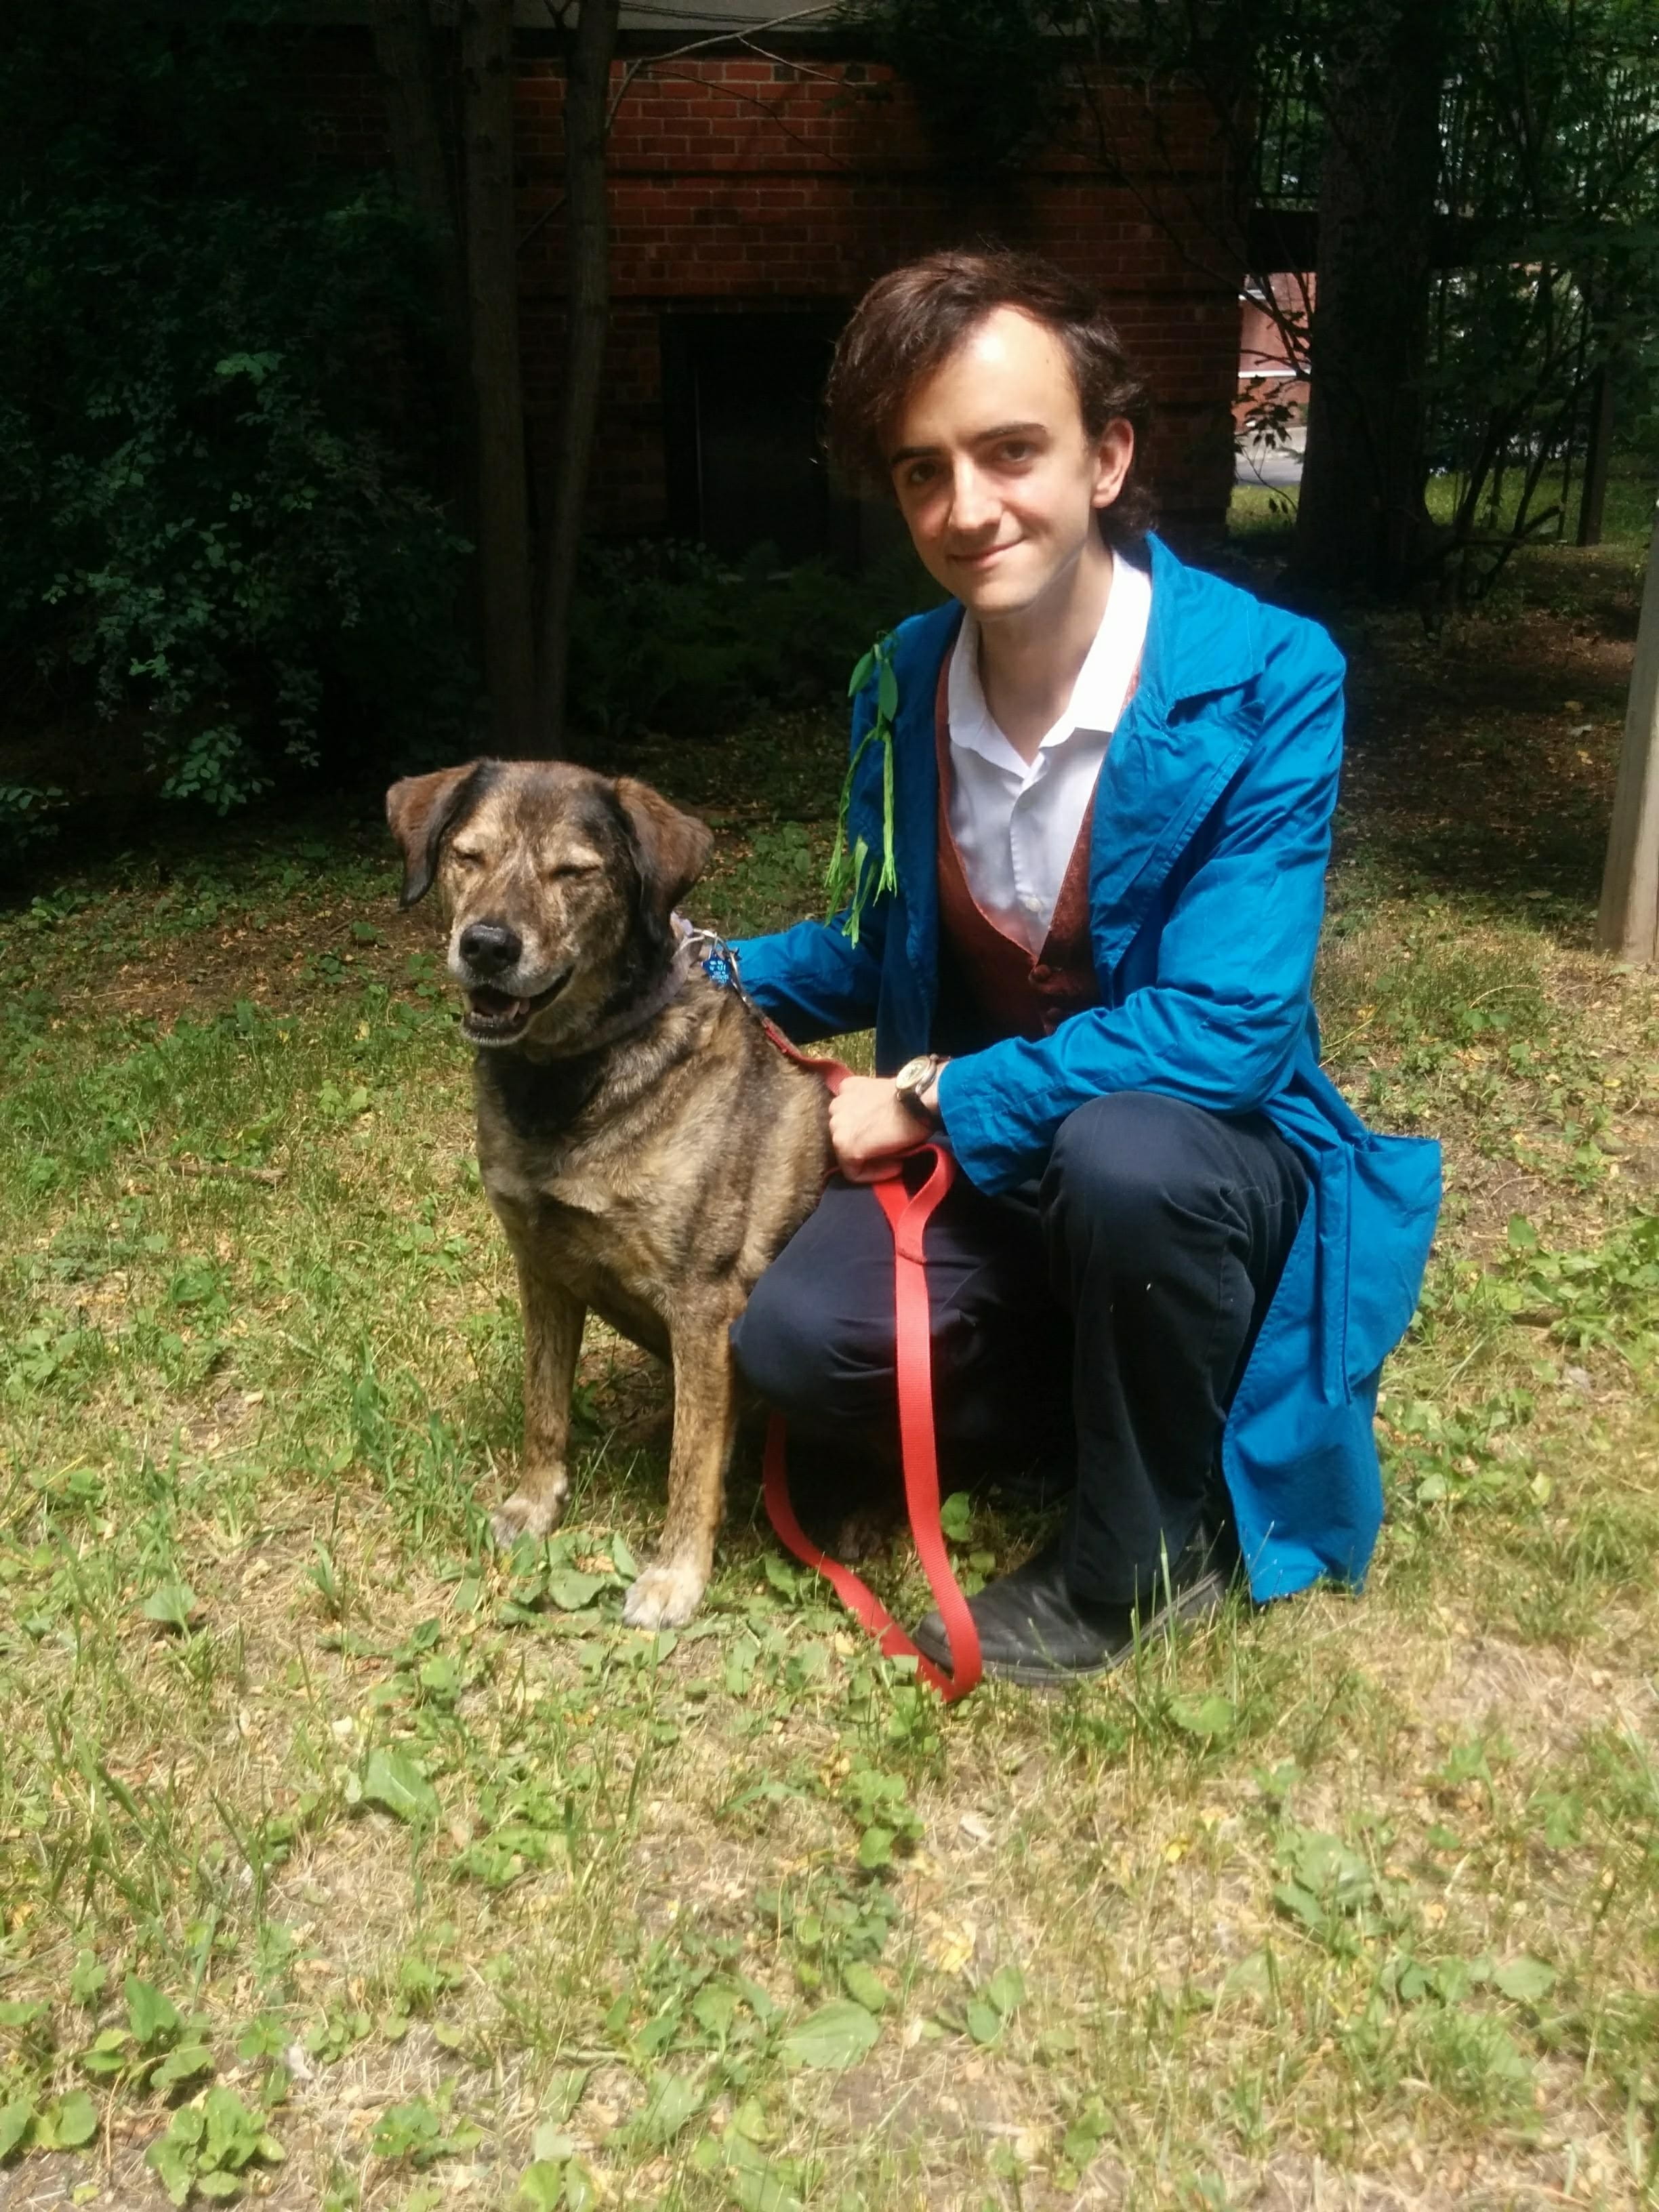 Me, dressed as Newt Scamander from Fantastic Beasts and Where to Find Them, accompanied by a dog named Bo who is a Good Boy